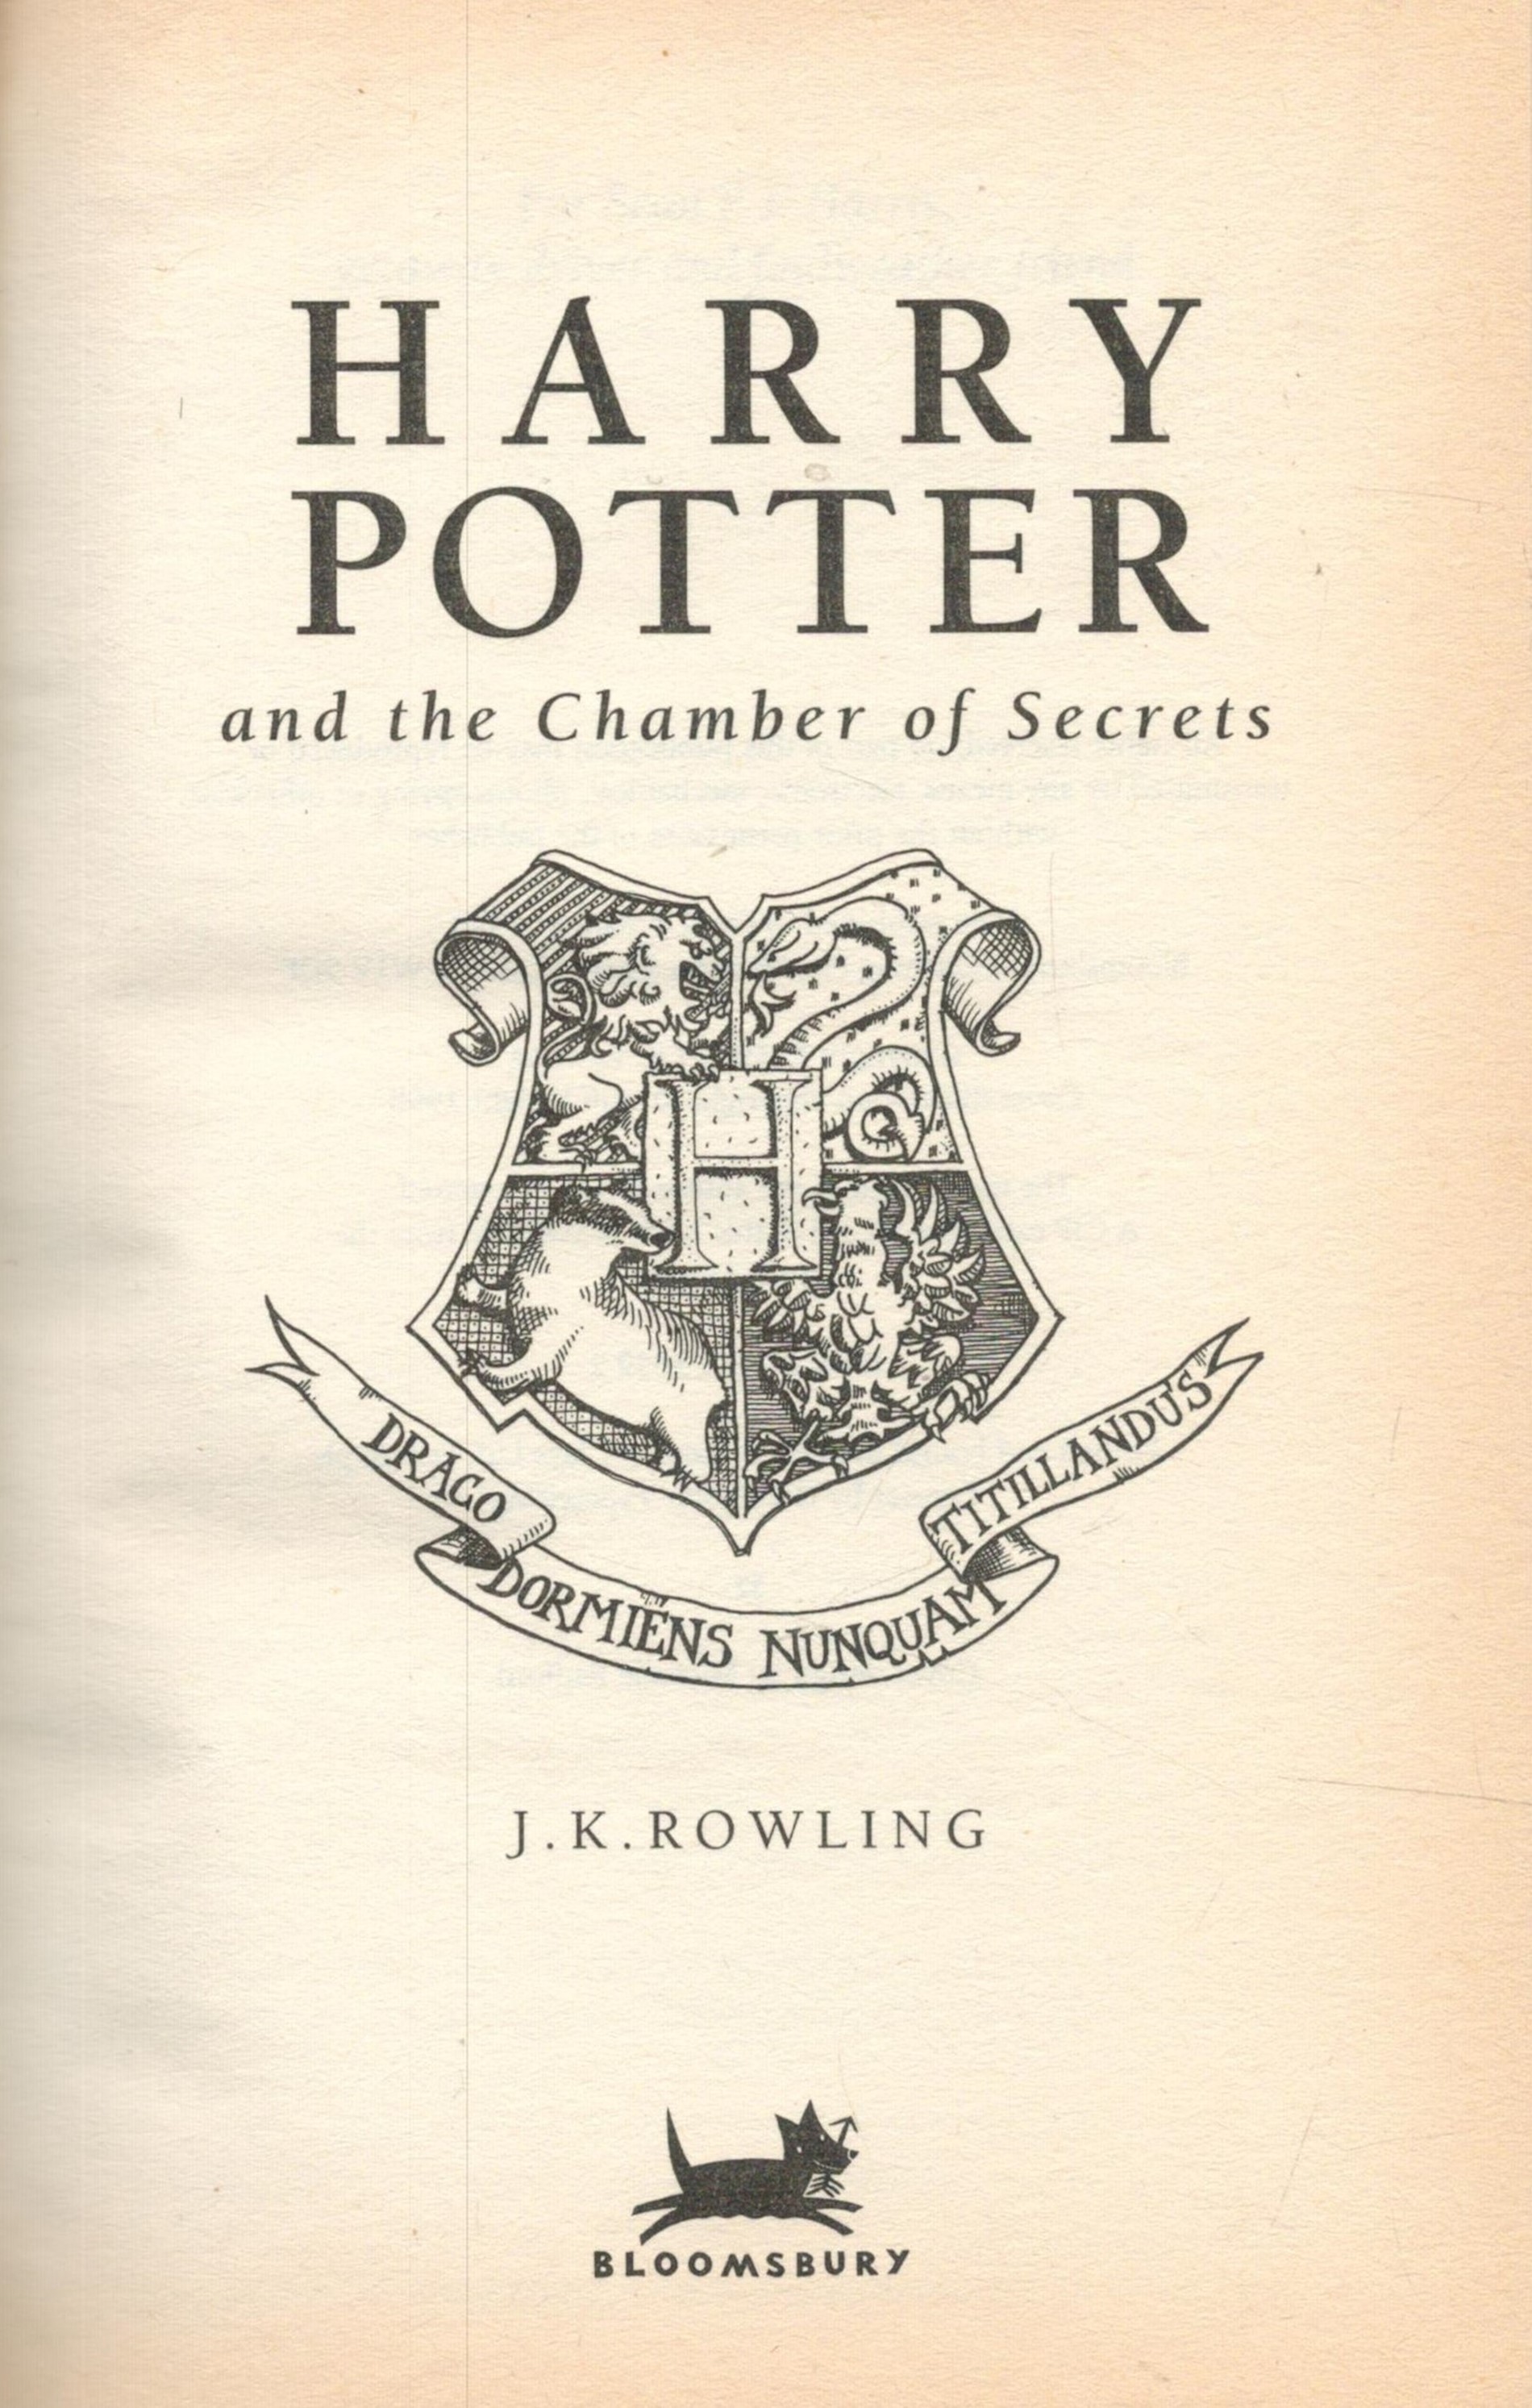 Harry Potter and the Chamber of Secrets by J K Rowling 1998 First Edition Hardback Book with 251 - Image 2 of 3